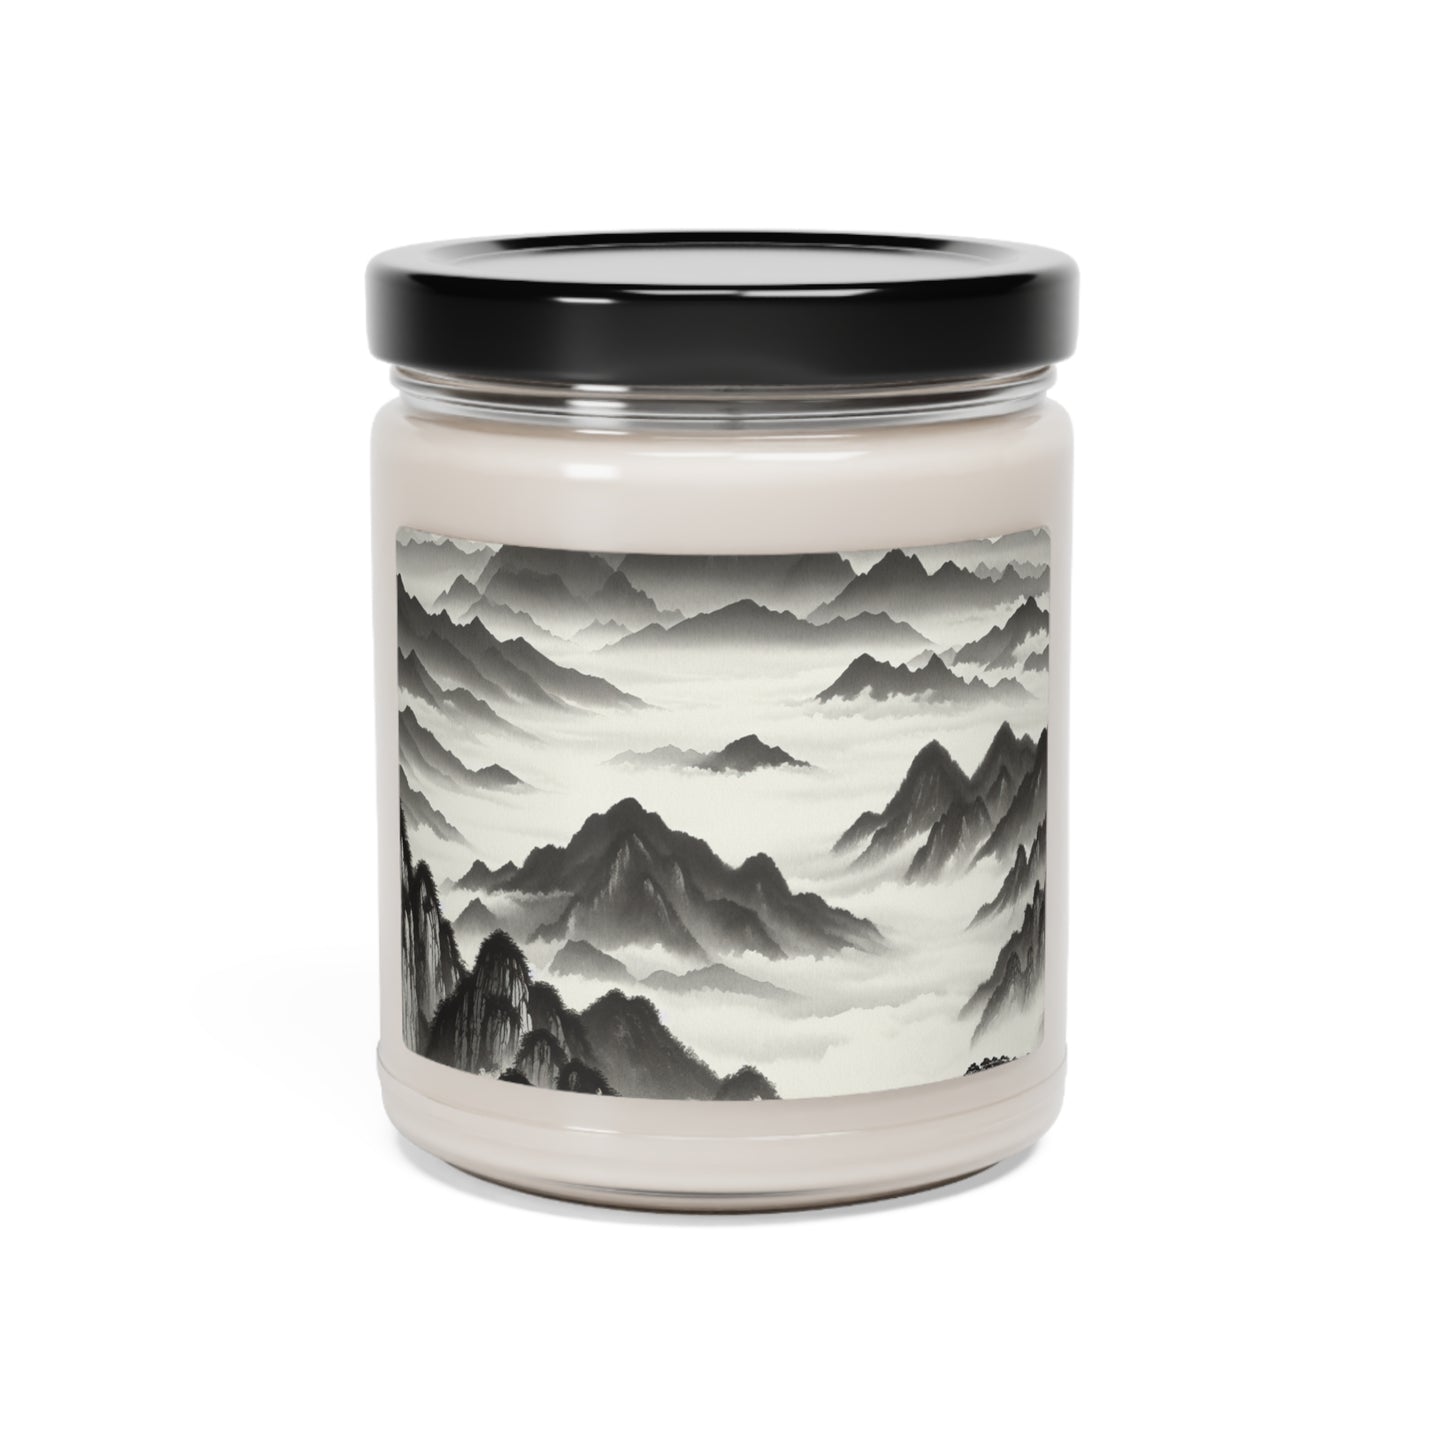 "Misty Peaks in the Fog" - The Alien Scented Soy Candle 9oz Ink Wash Painting Style